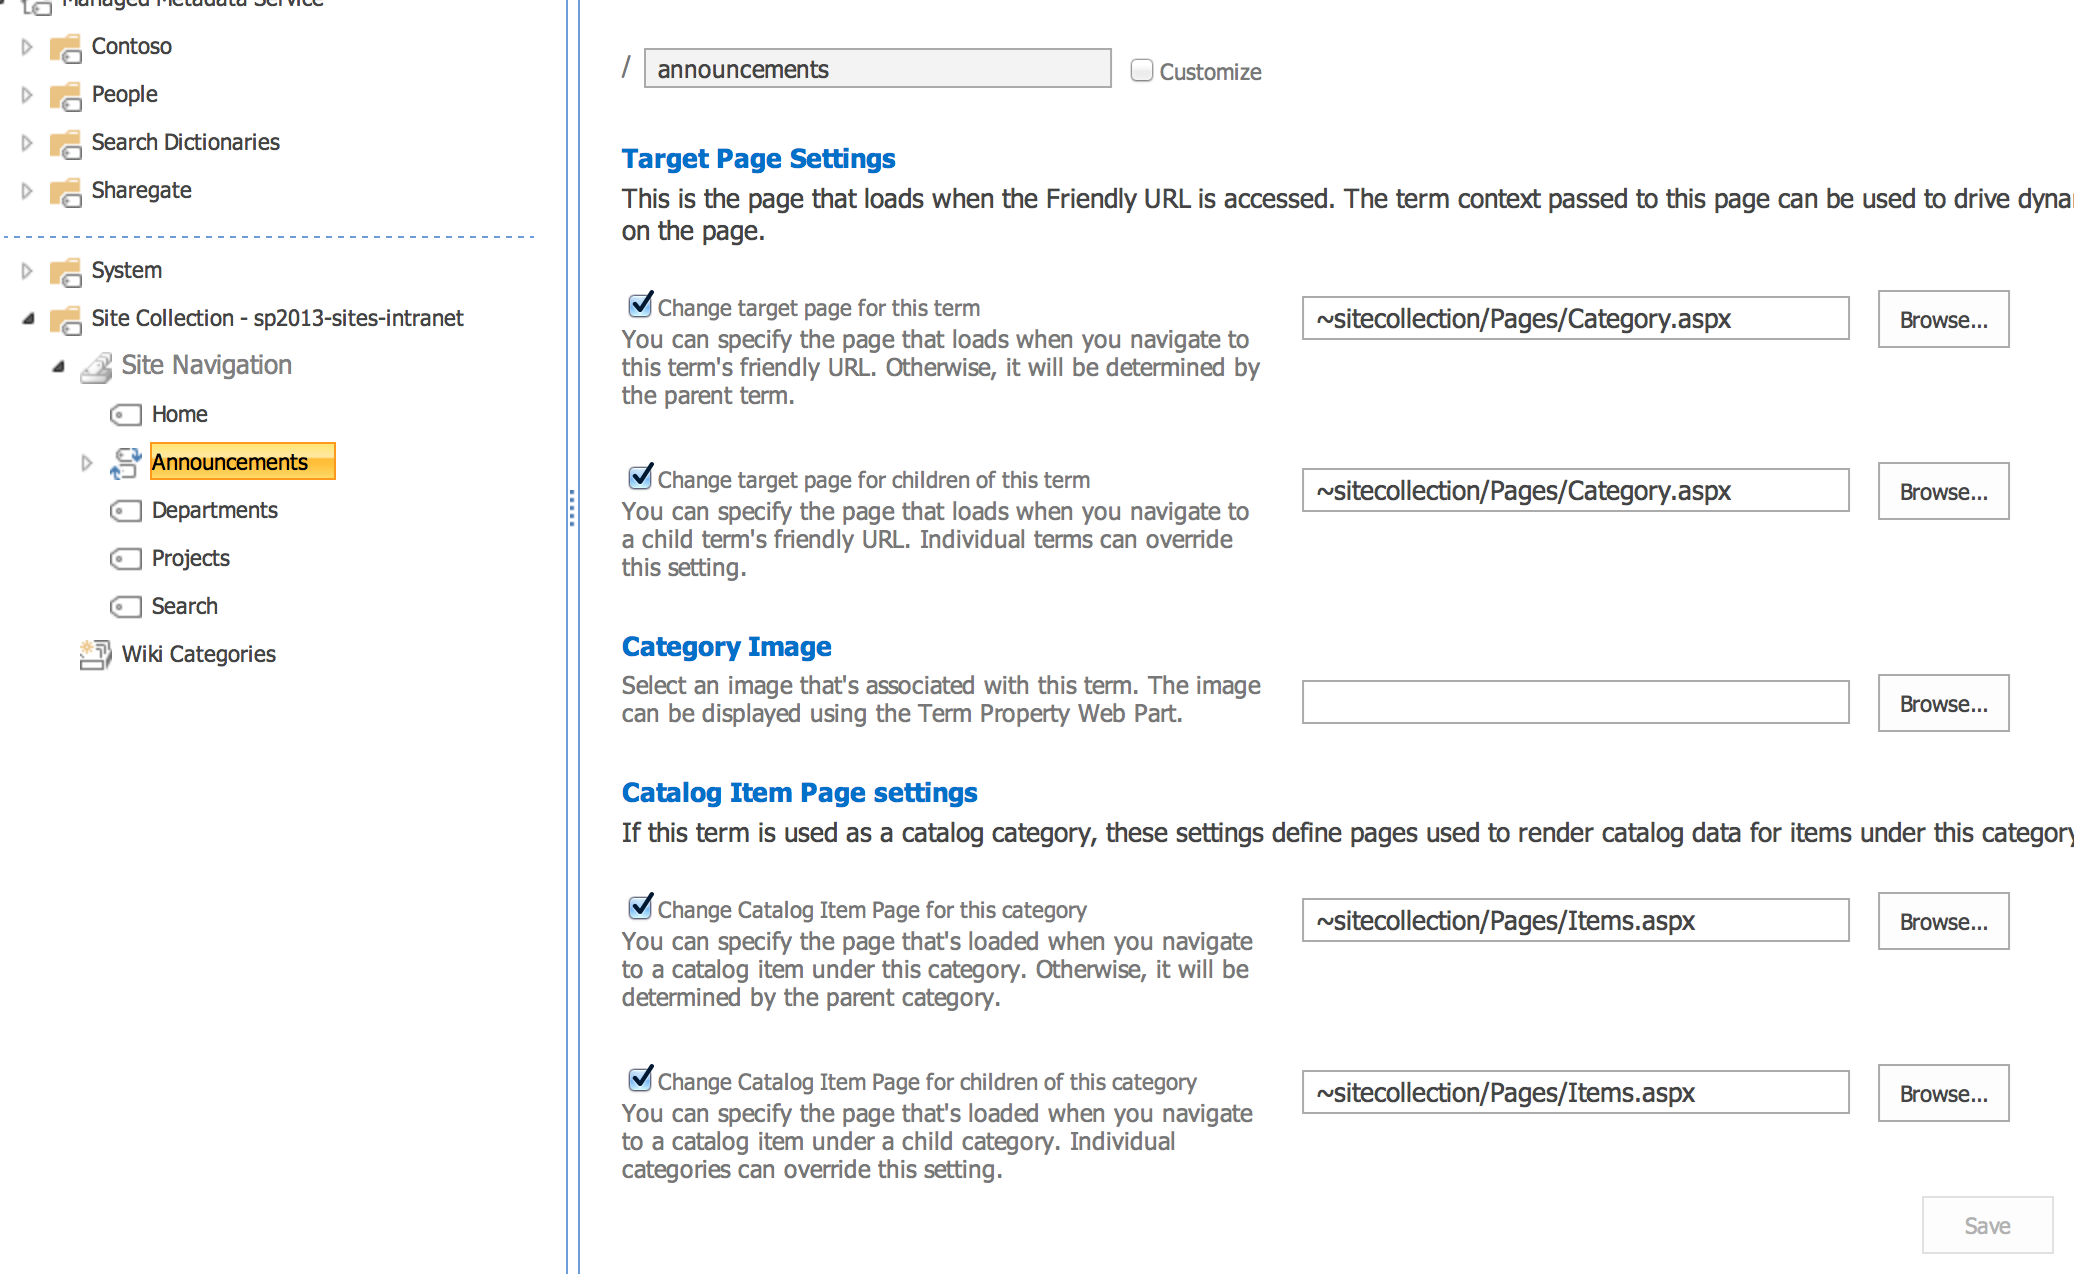 Migrating to SharePoint 2013, use the Product Catalog